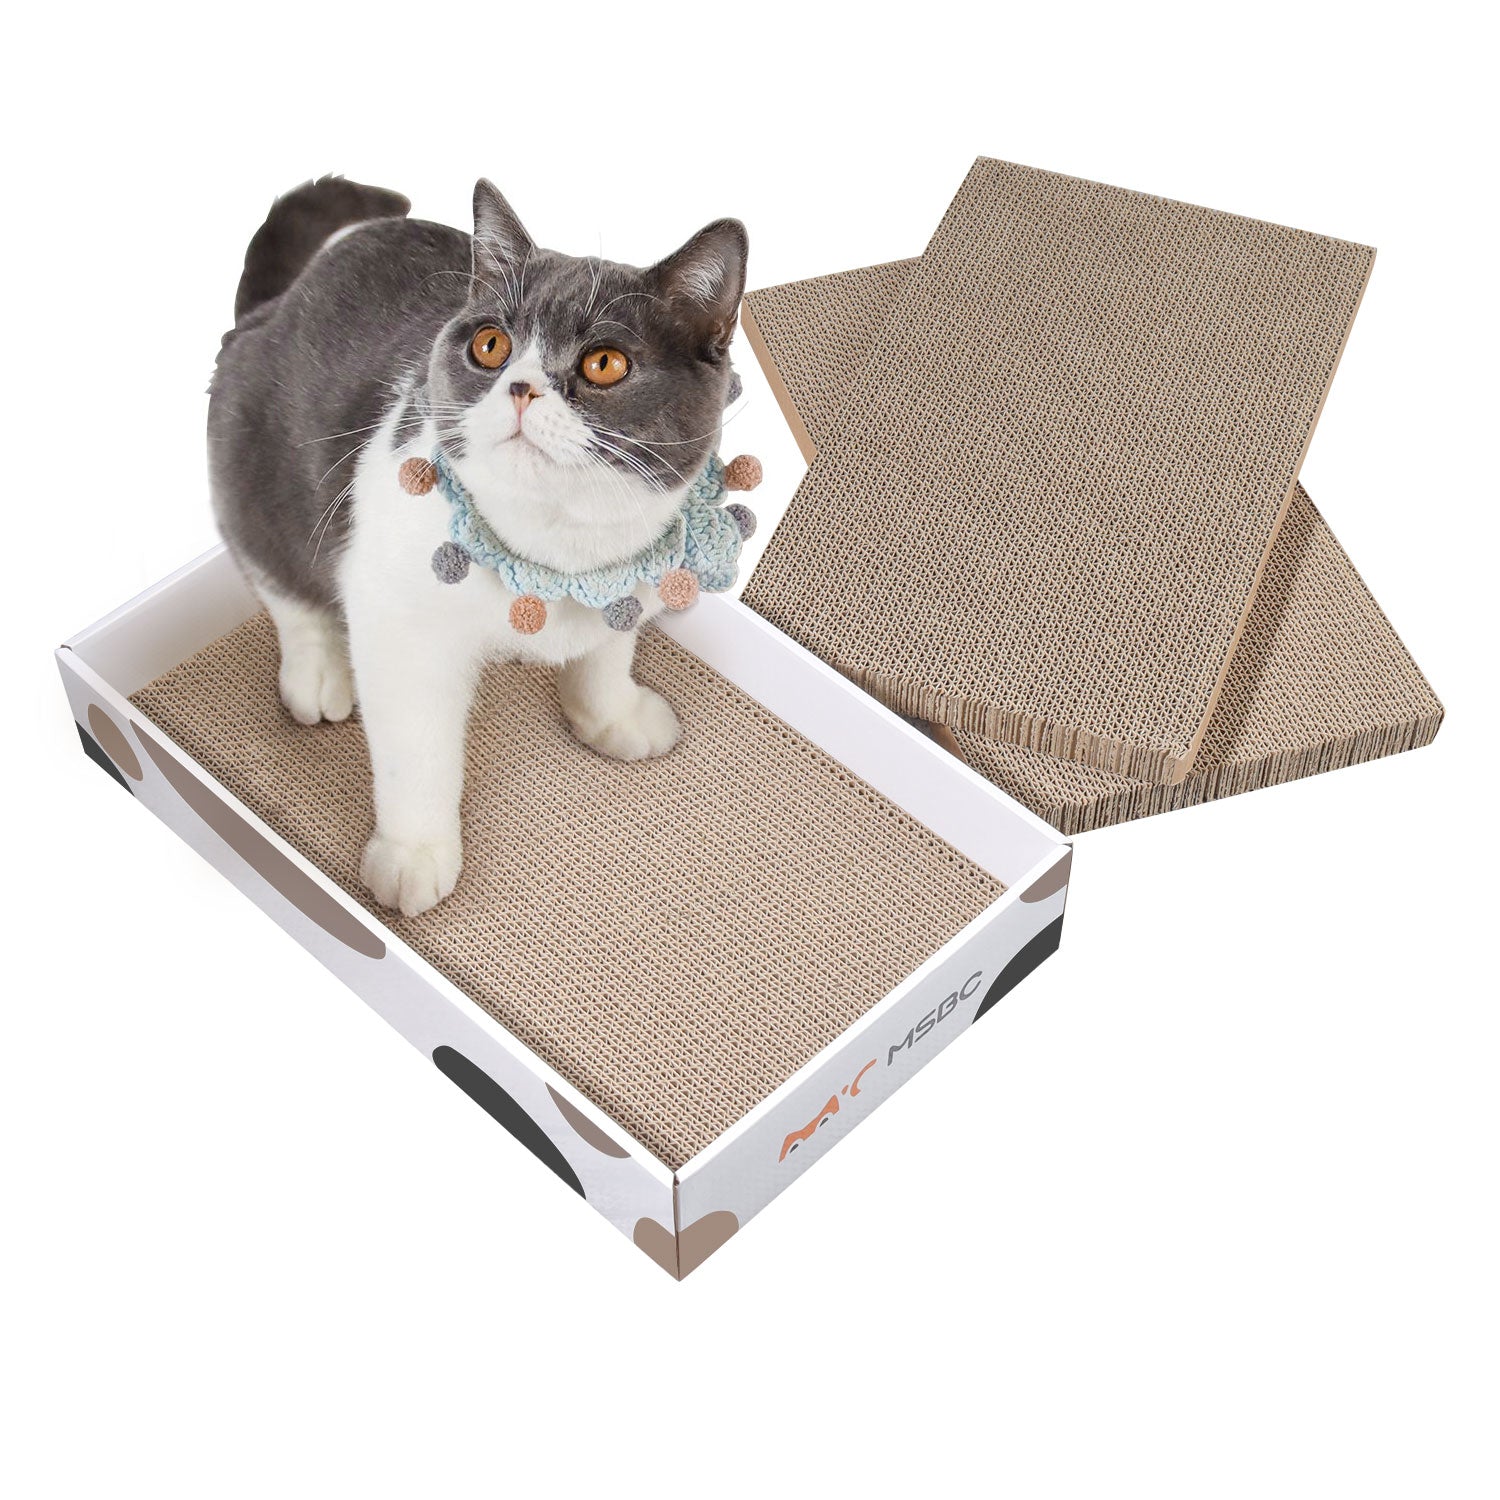 Comsaf Durable Cat Scratcher Bed for Furniture Protection, Cat Training Toy, Set of 1, 3 Pcs